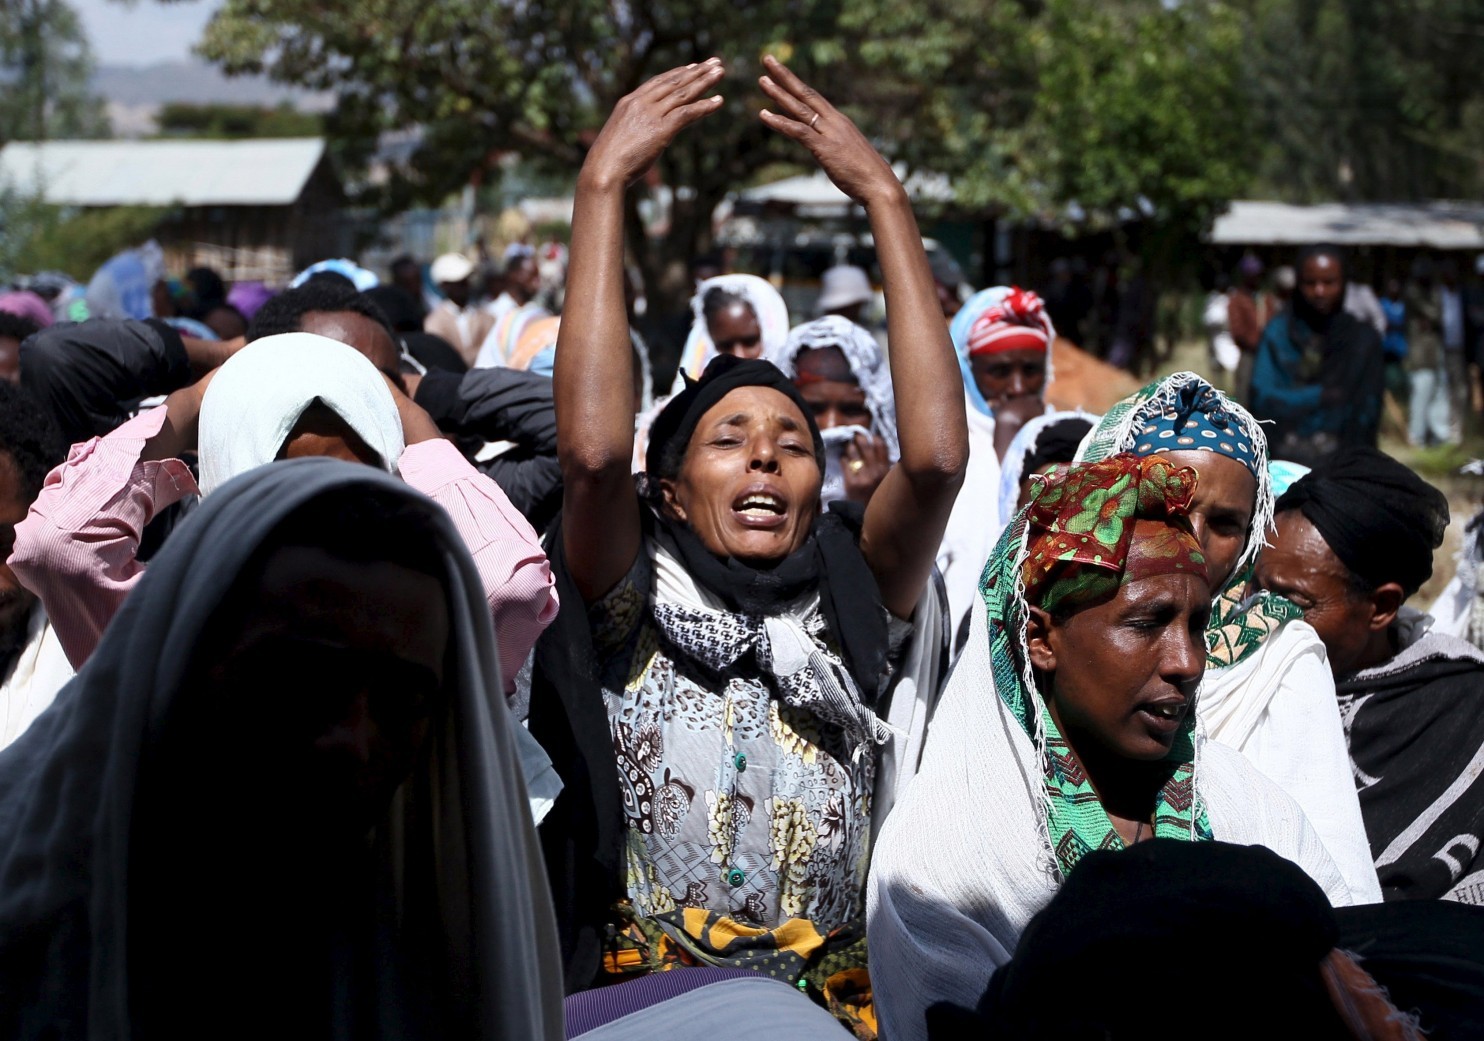 2015-12-17T191154Z_01_AFR10_RTRIDSP_3_ETHIOPIA-PROTESTS